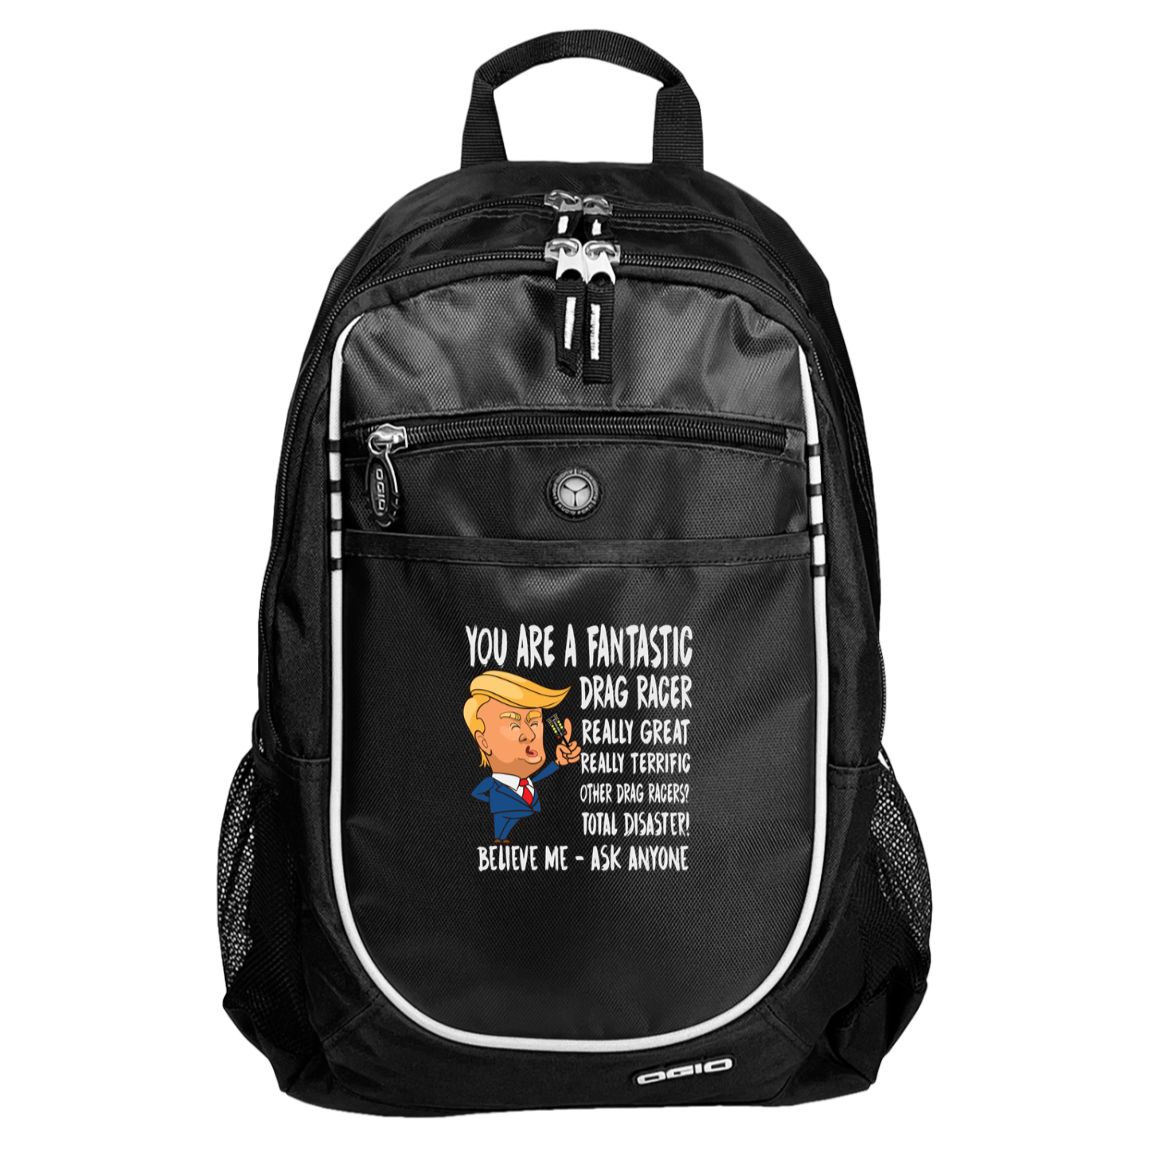 You're A Fantastic Drag Racer Bags and Backpacks